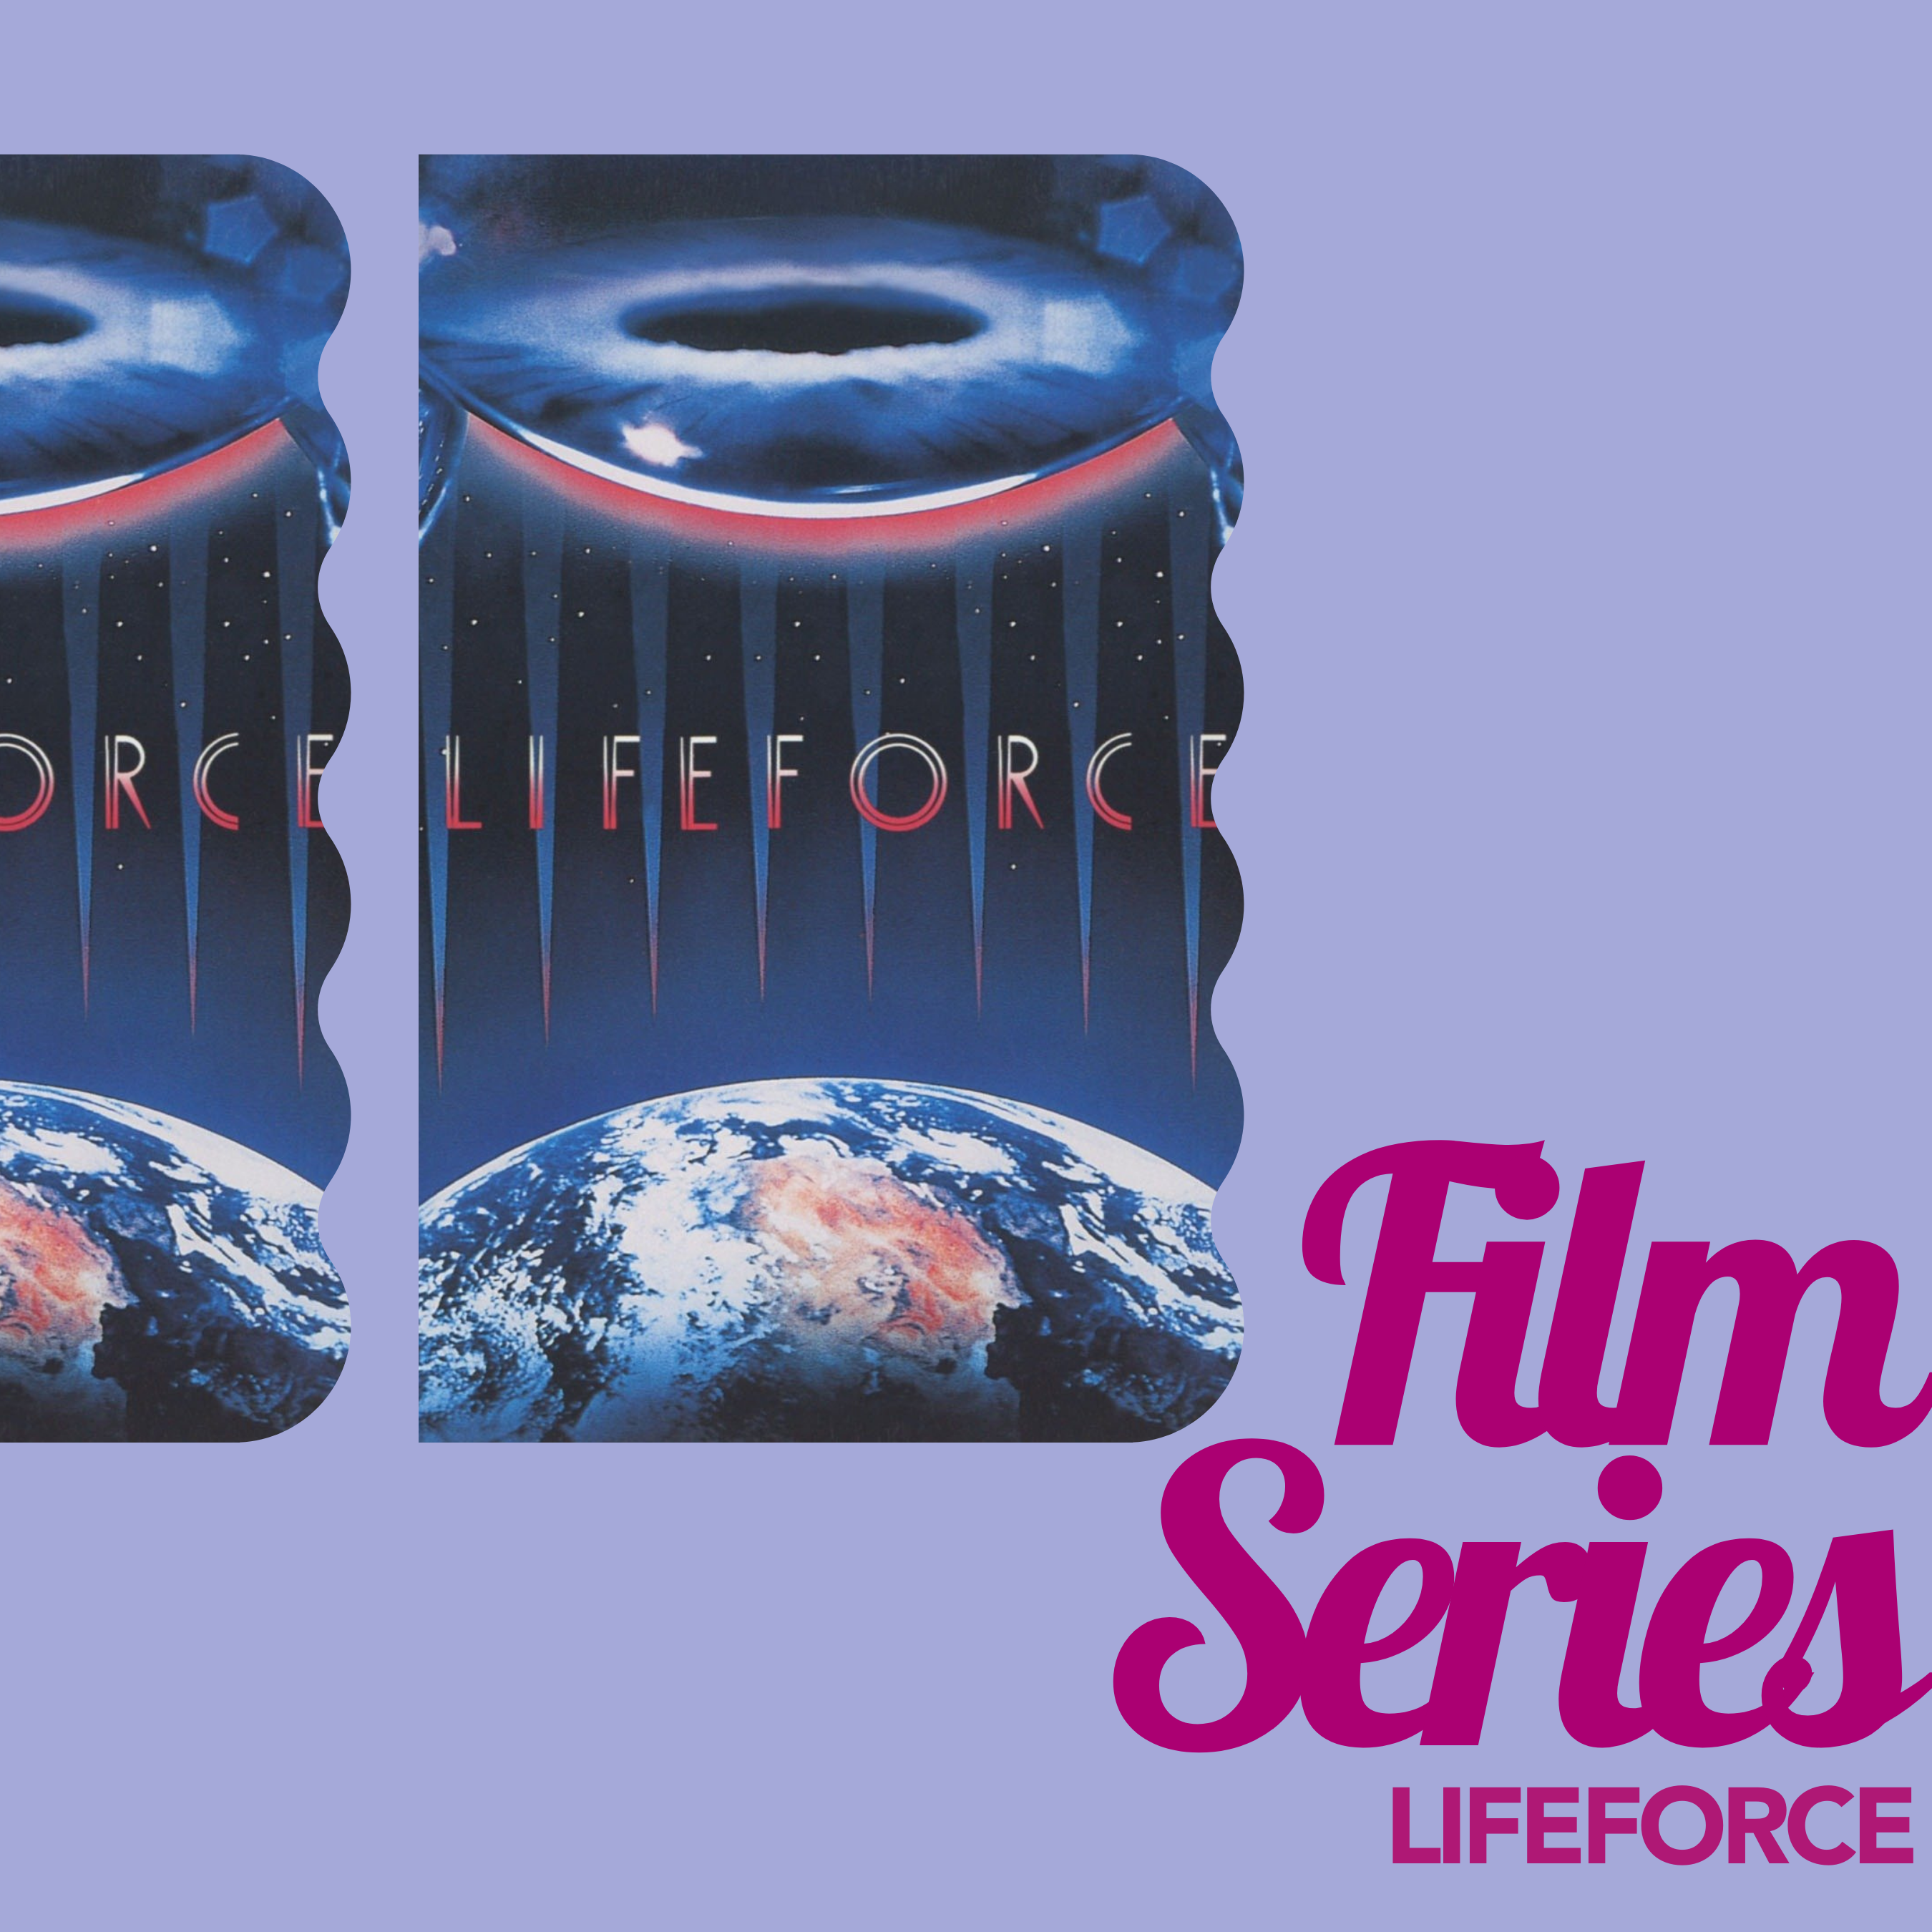 Event art with a lavender background and orchid text that reads, “Film Series” and “Lifeforce” on the bottom right. On the graphic, there are two images of the same film poster featuring an otherworldly scene of what looks like a white figure with wings watching another figuring what looks like a black hole hovering above Earth.